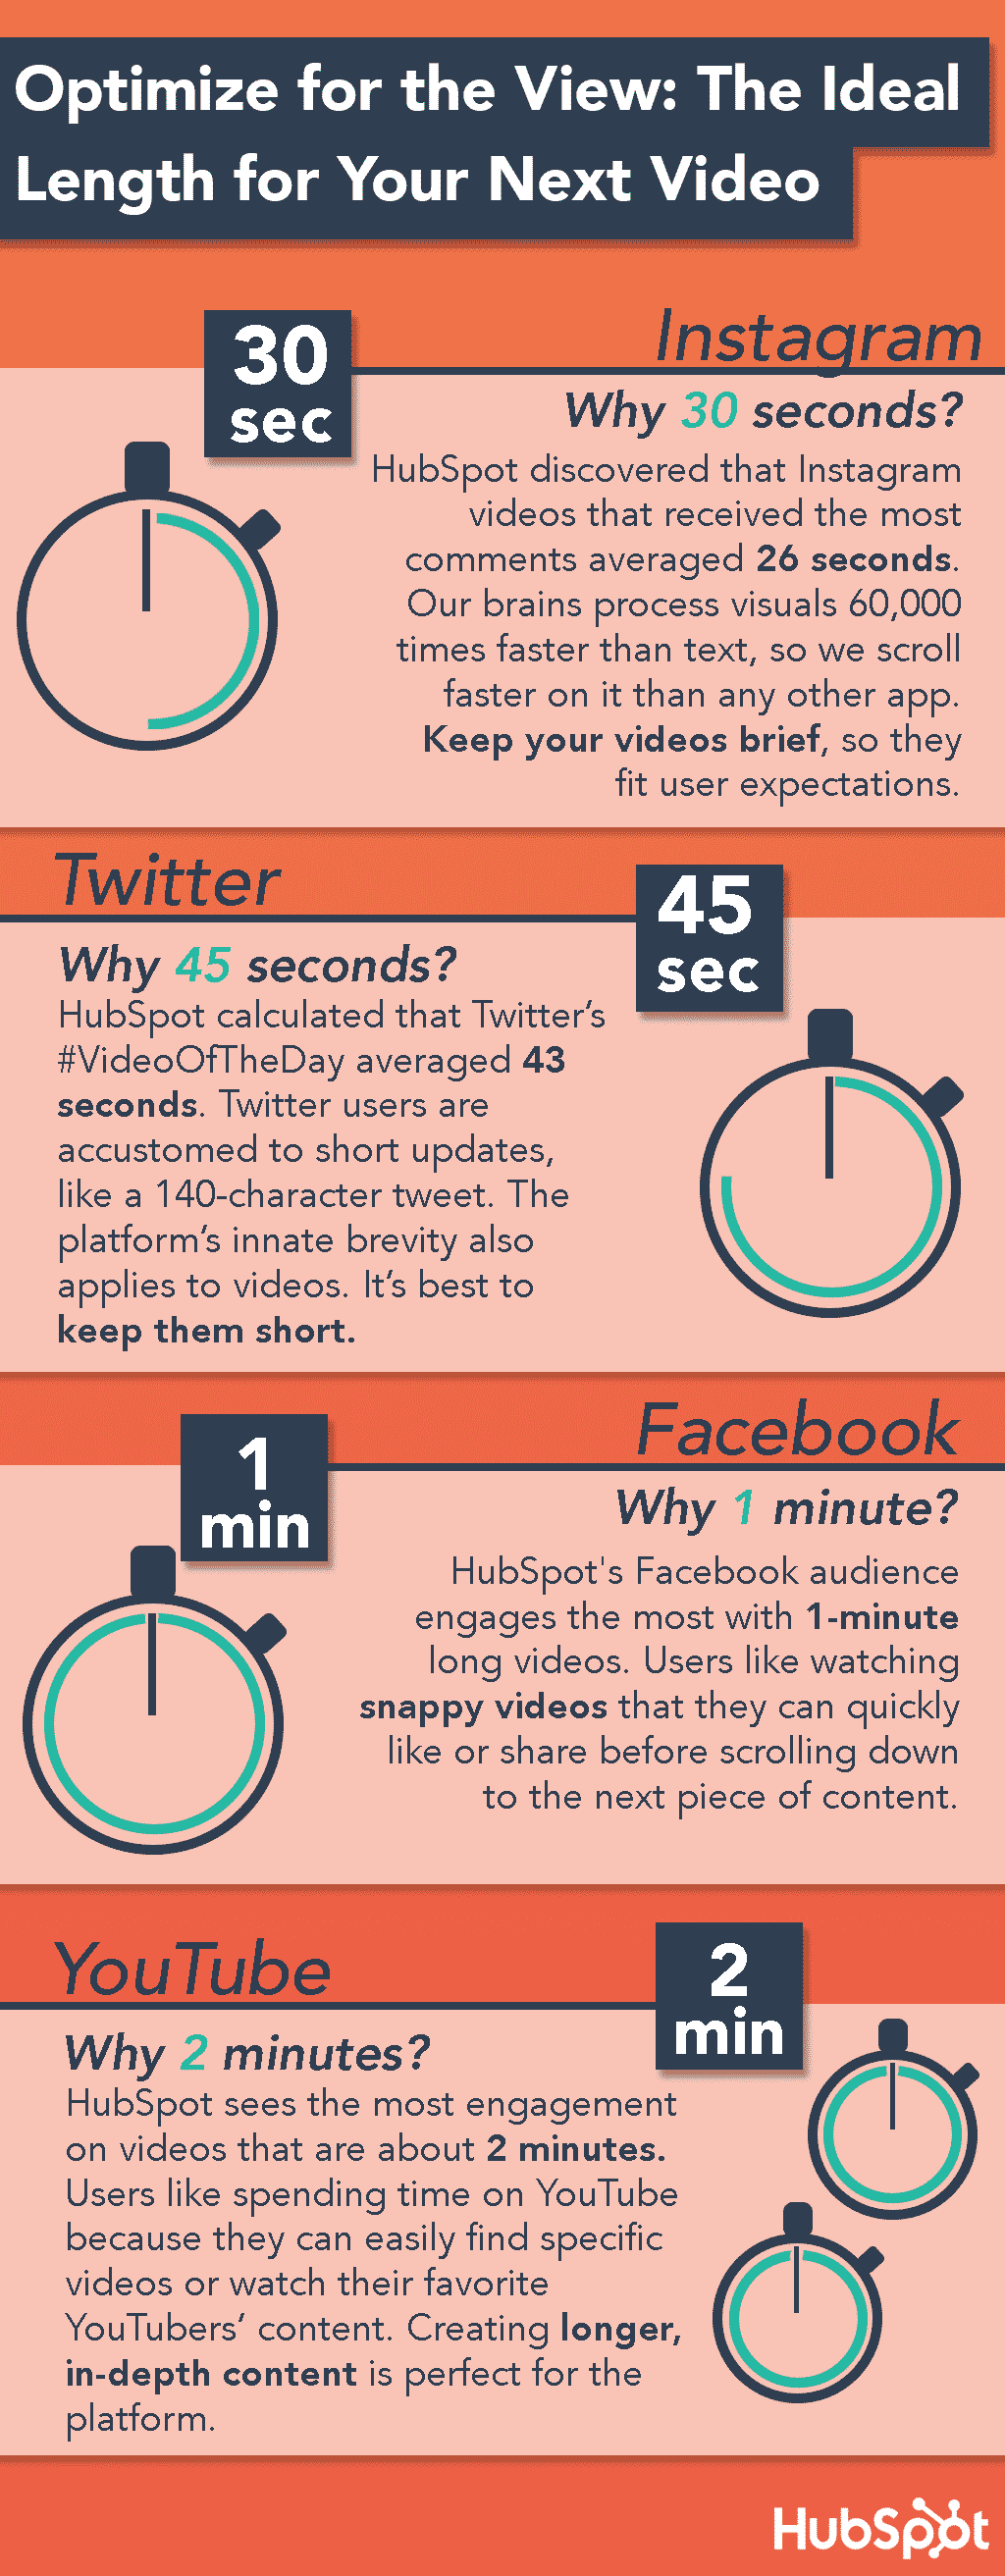 The ideal length for your next video: Instagram - 30 seconds, Twitter - 45 seconds, Facebook - 1 minute, YouTube - 2 minutes